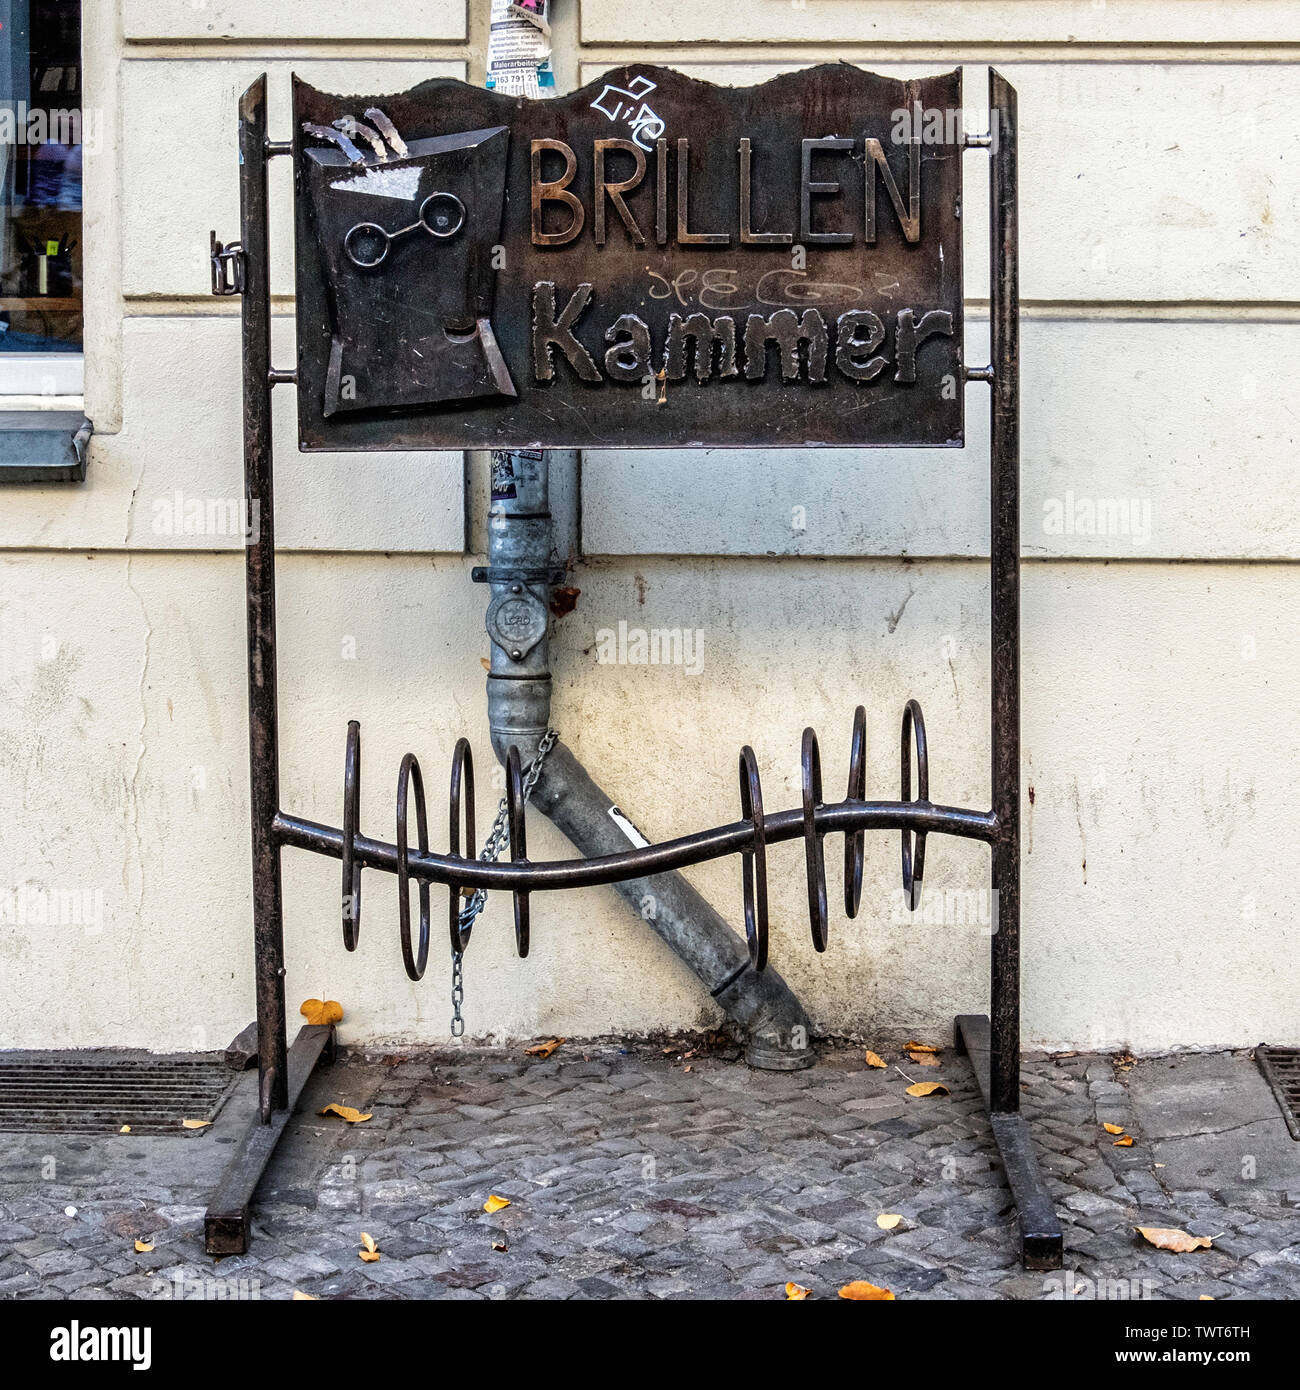 Decorative bicycle stand for parking bikes outside Brillen Kammer optician in Friedrichshain, Berlin Stock Photo